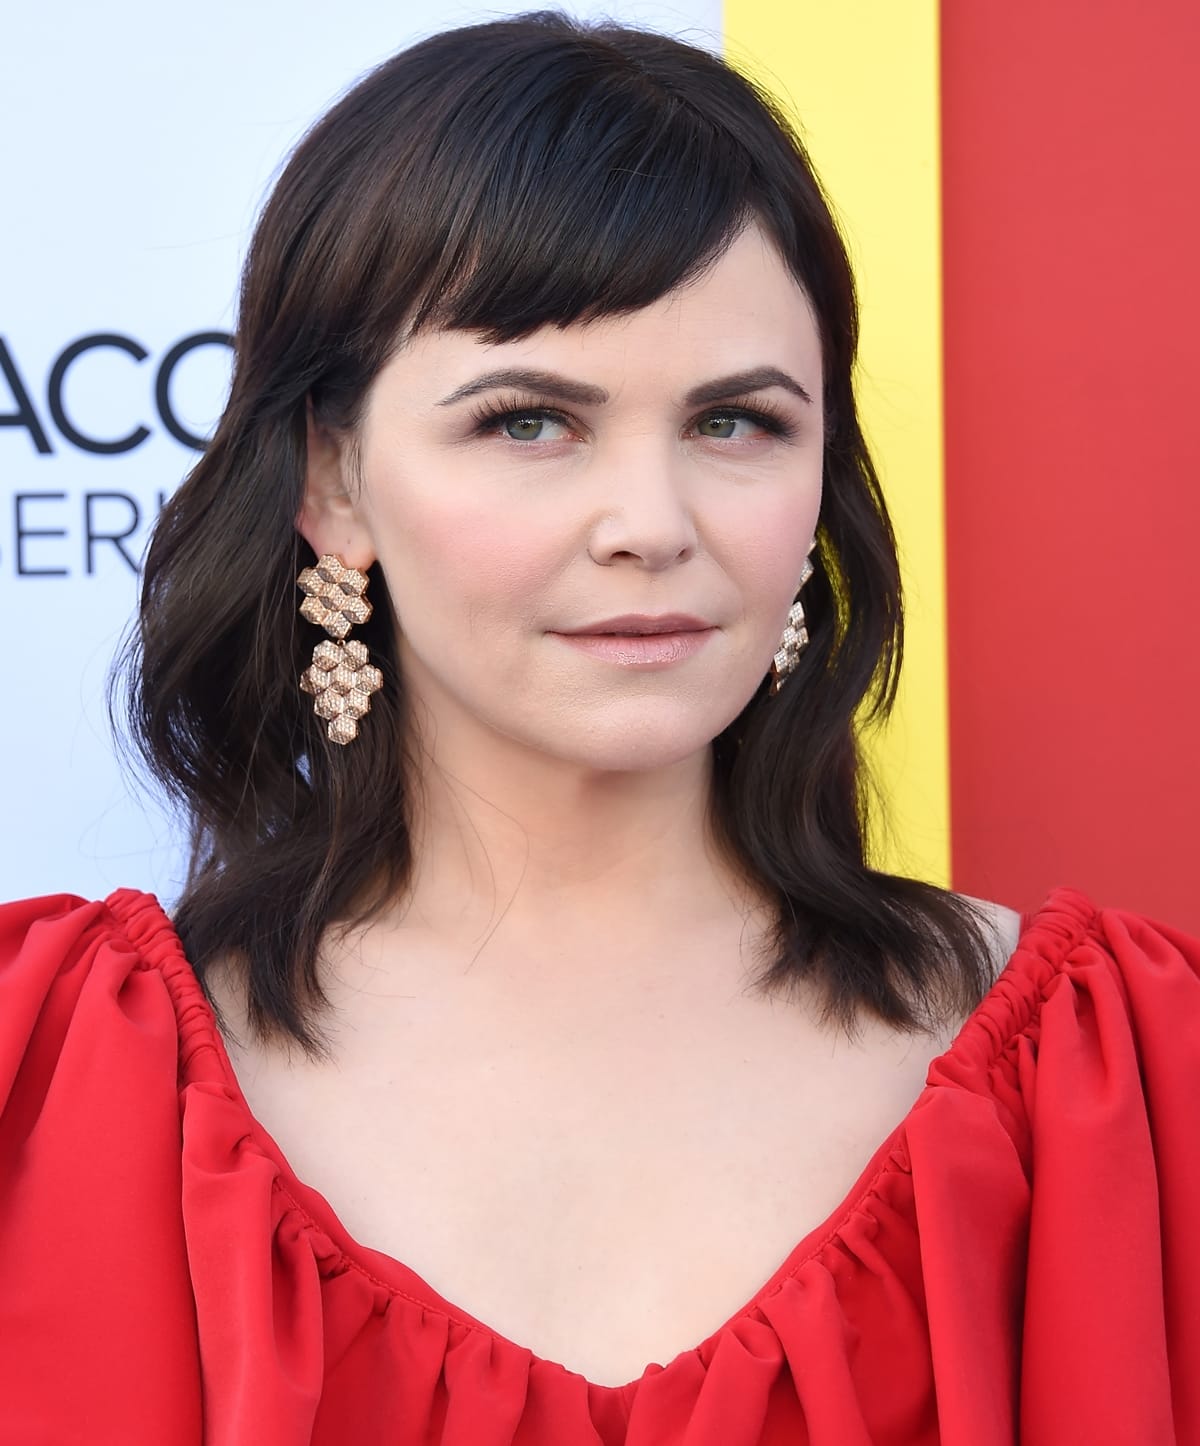 Ginnifer Goodwin in a red dress at the premiere of Why Women Kill